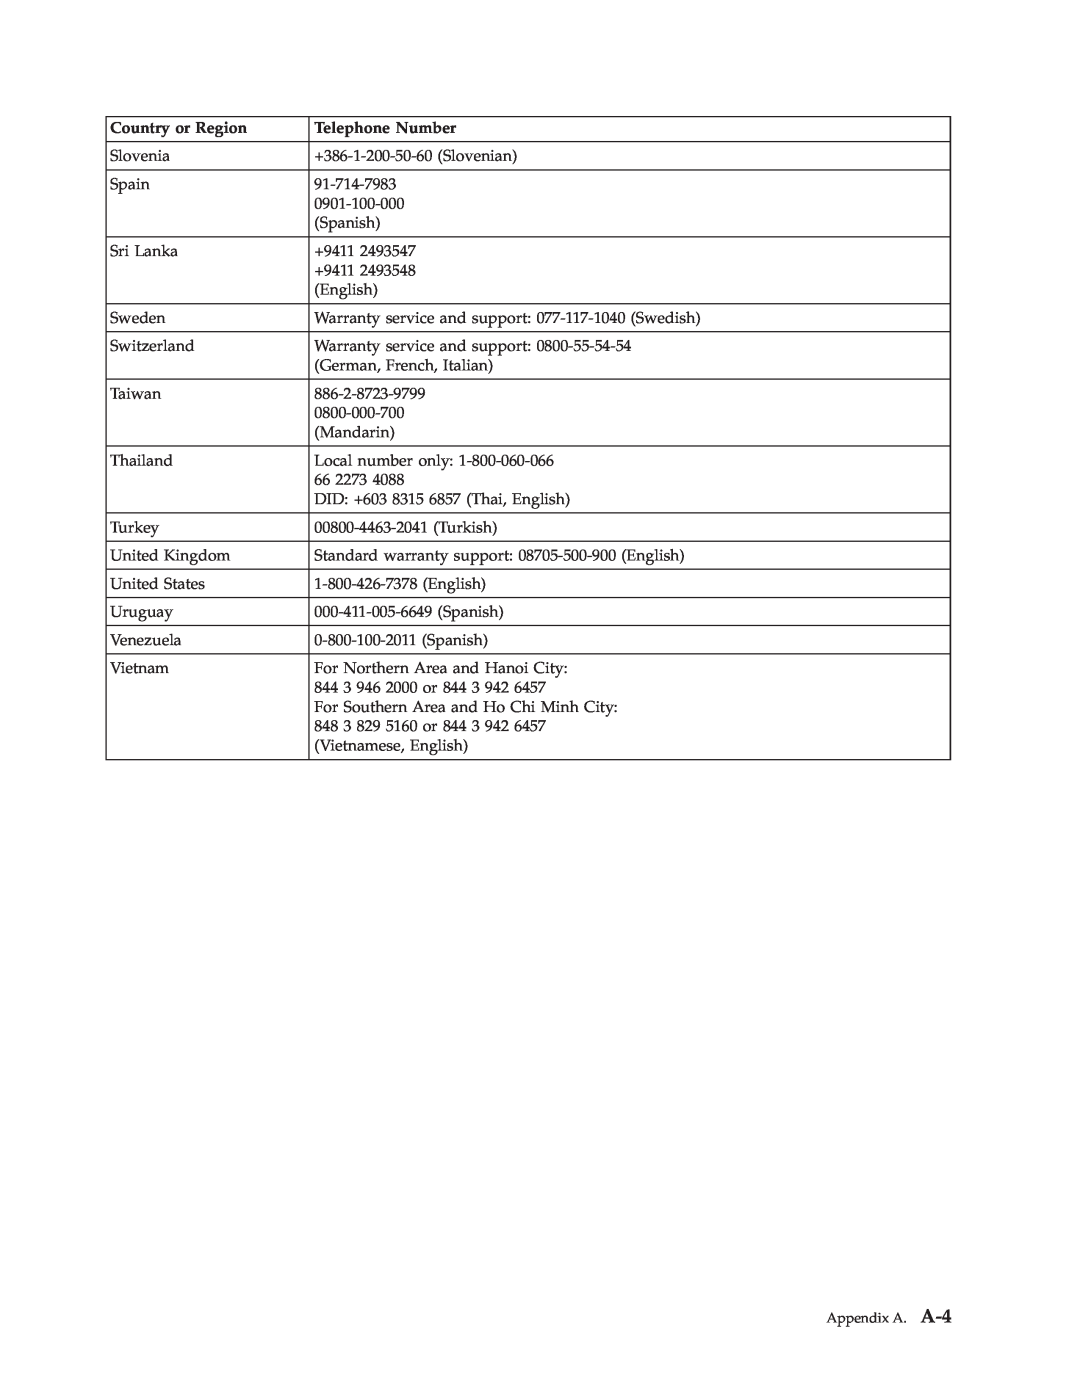 Lenovo D186 manual Country or Region, Telephone Number, Appendix A. A-43 